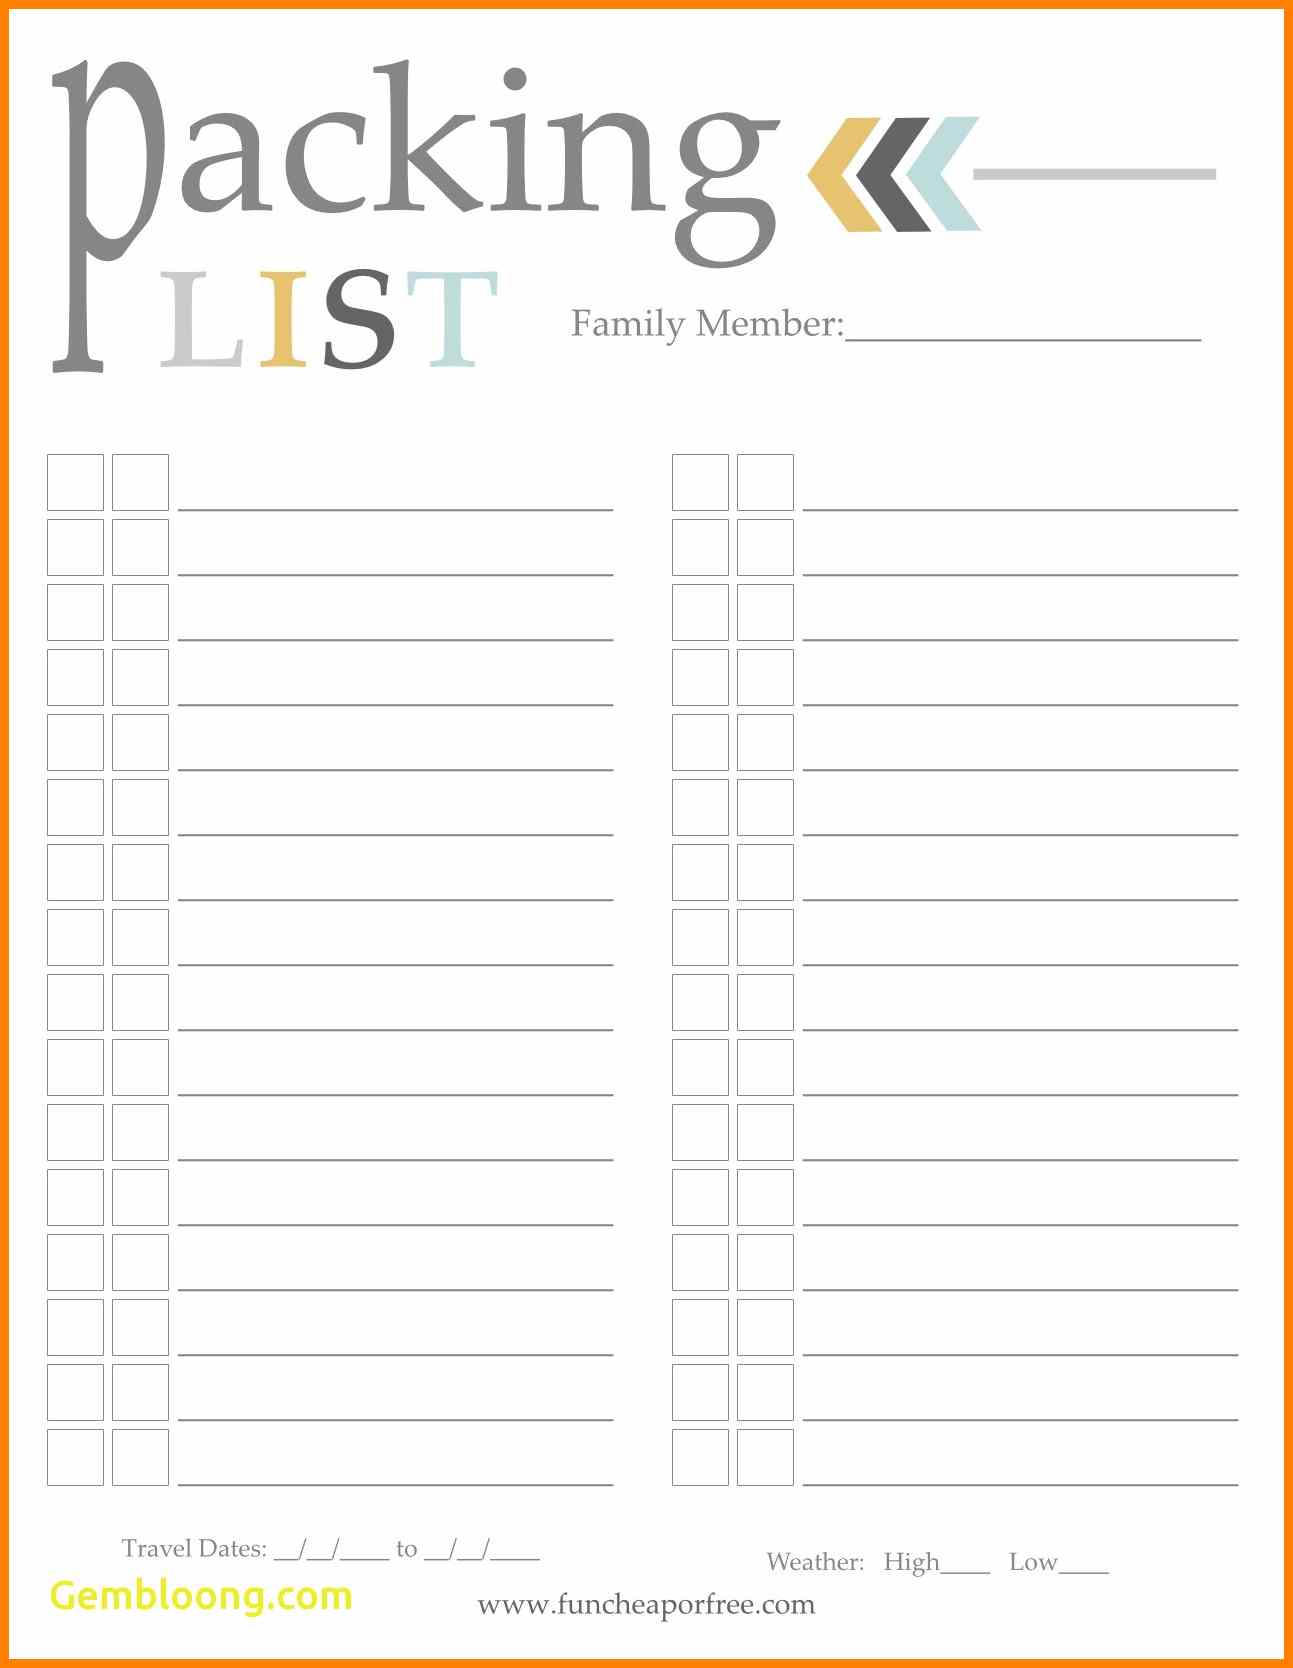 Free Packing List Template for Vacation, Travel or College